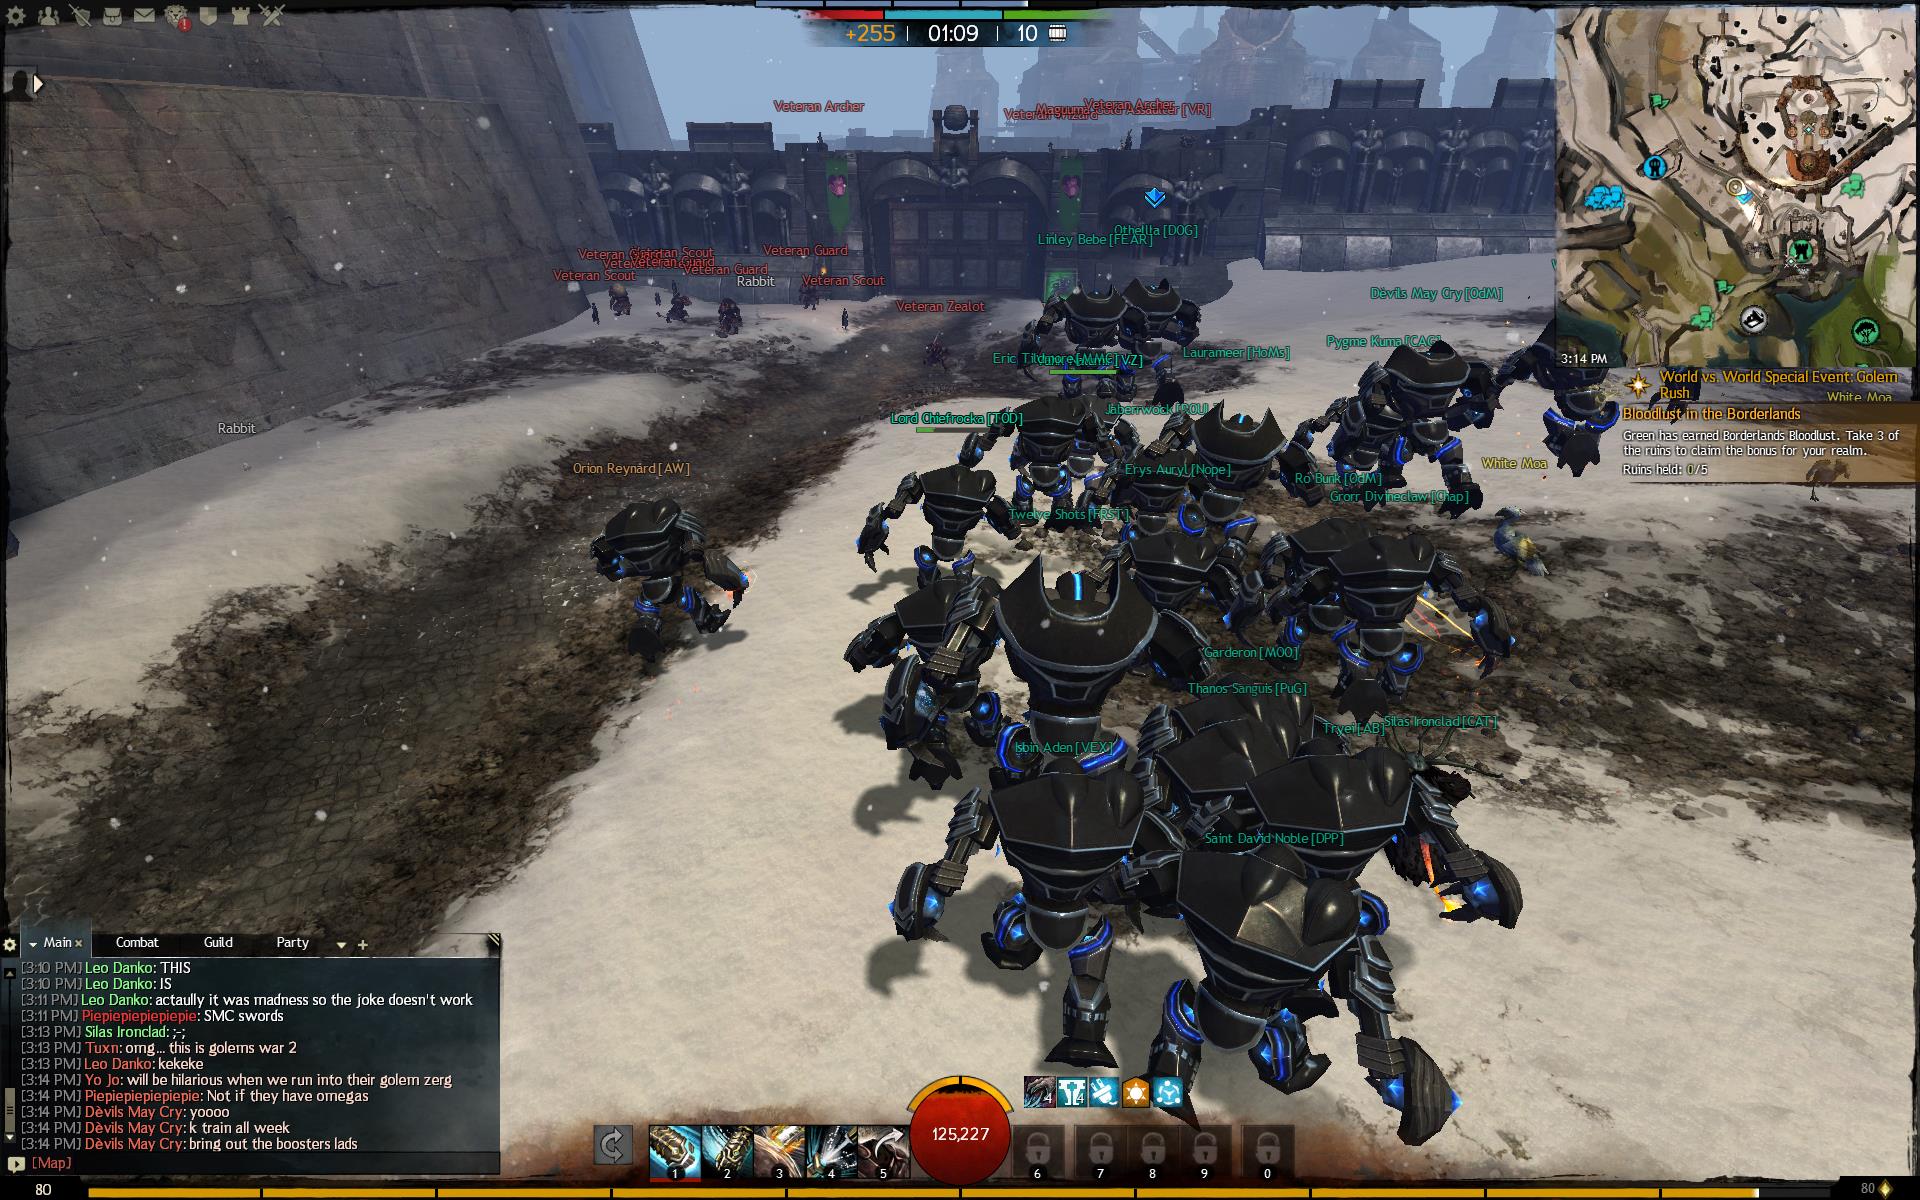 Attack of the Golems